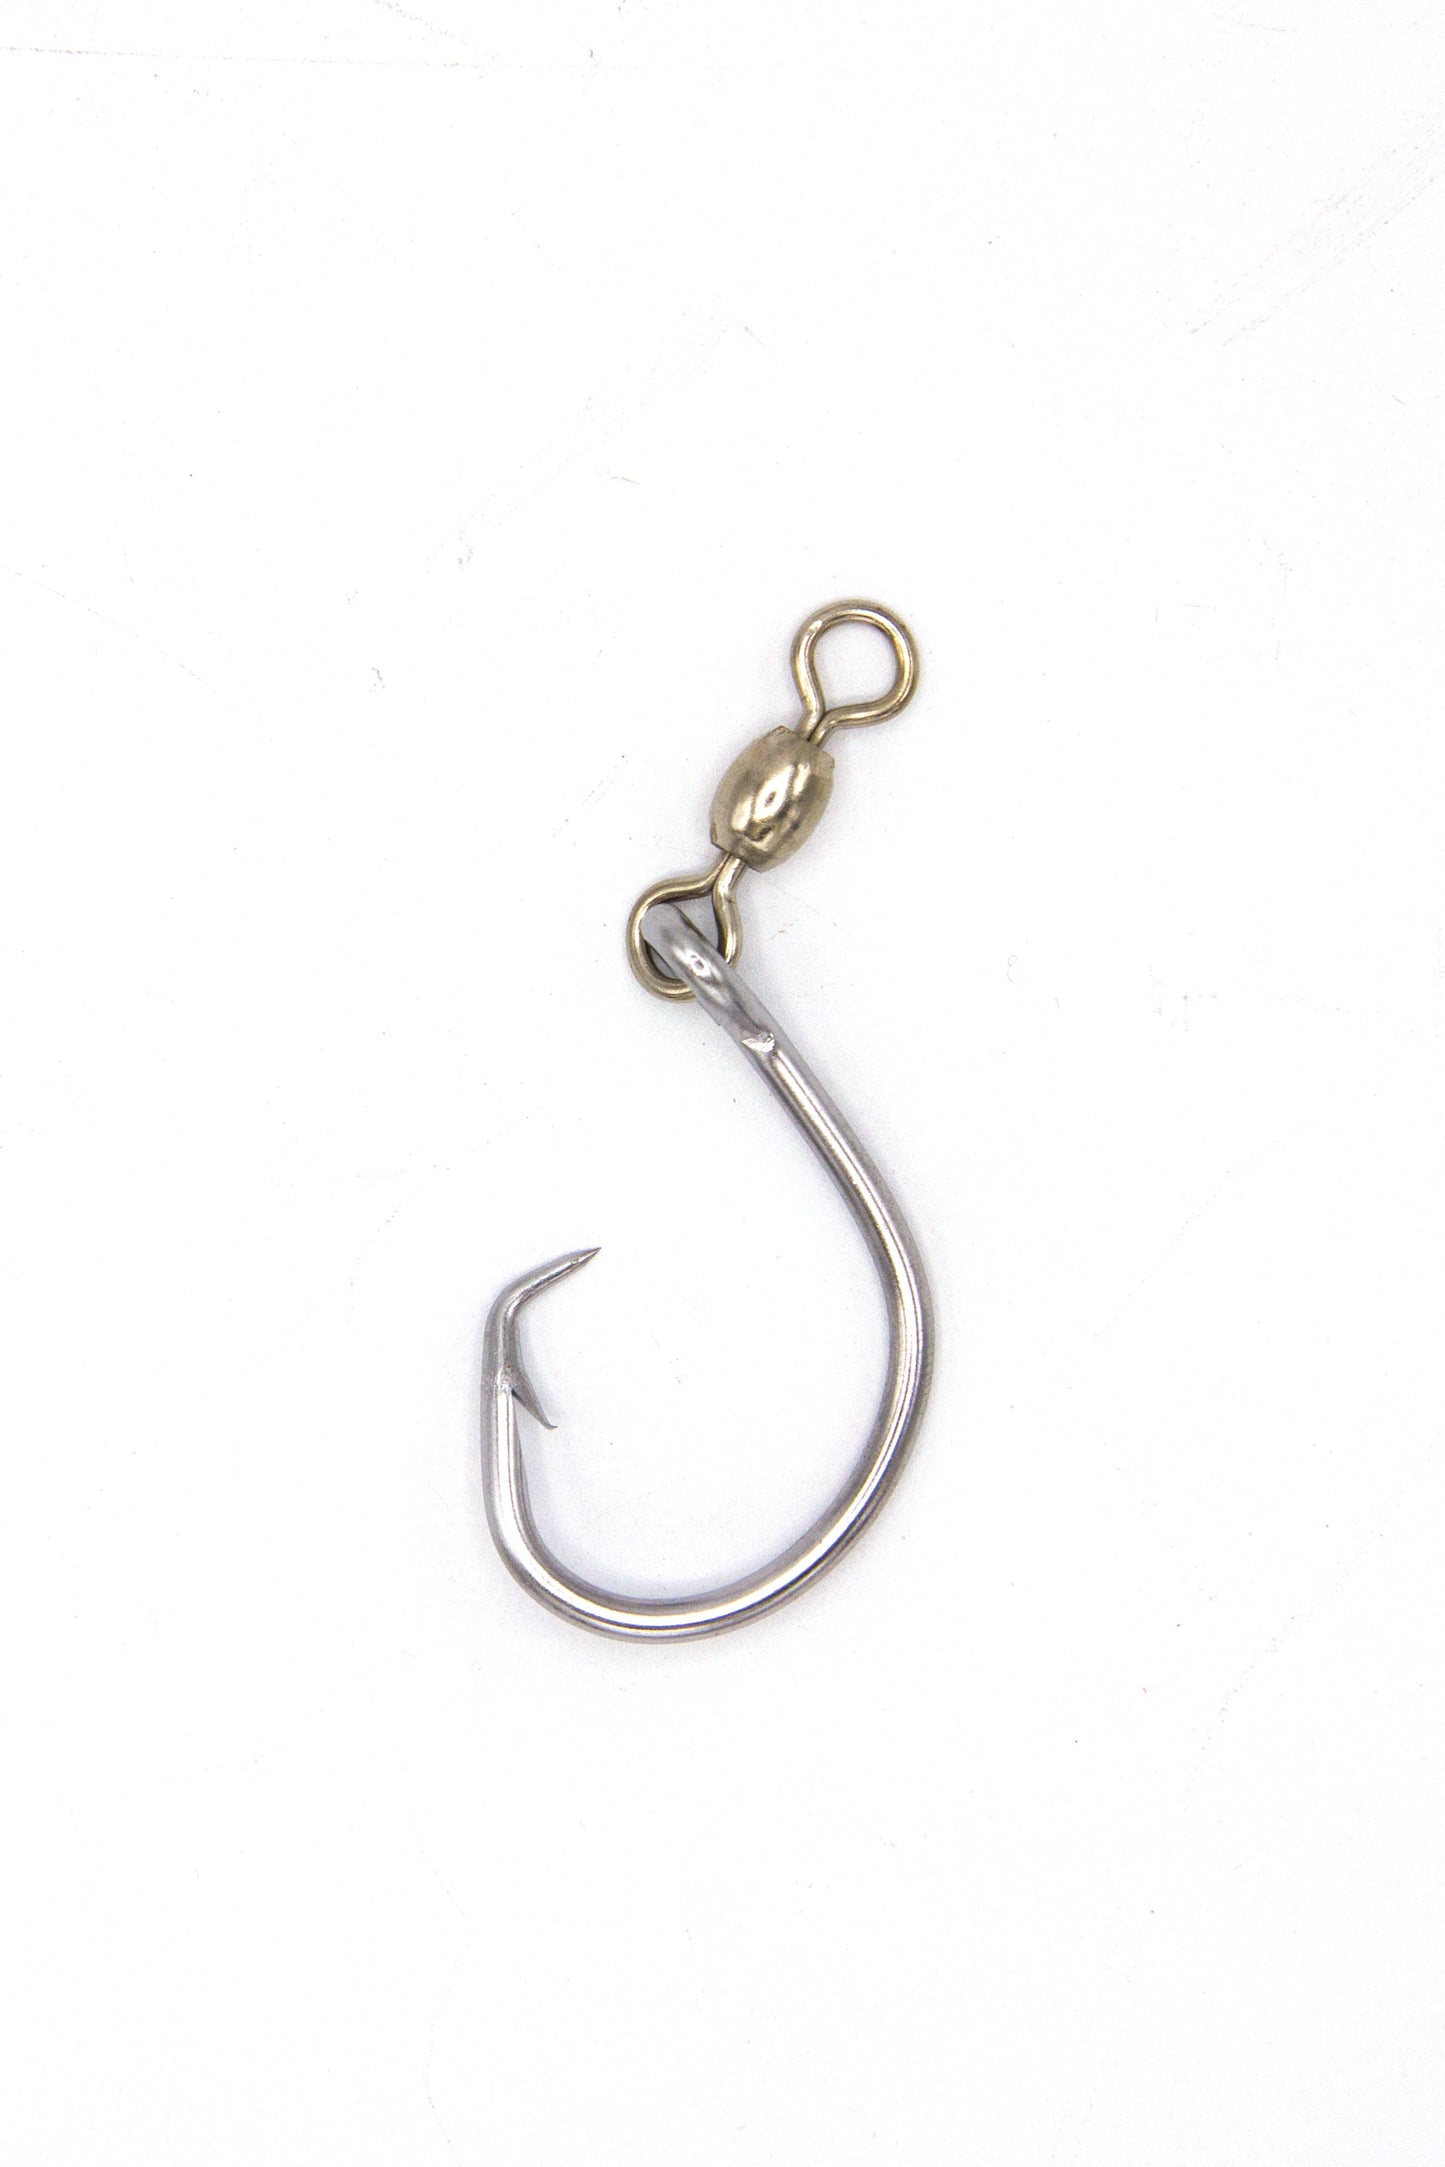 Max-Catch 12/0 Stainless Steel Circle Hooks